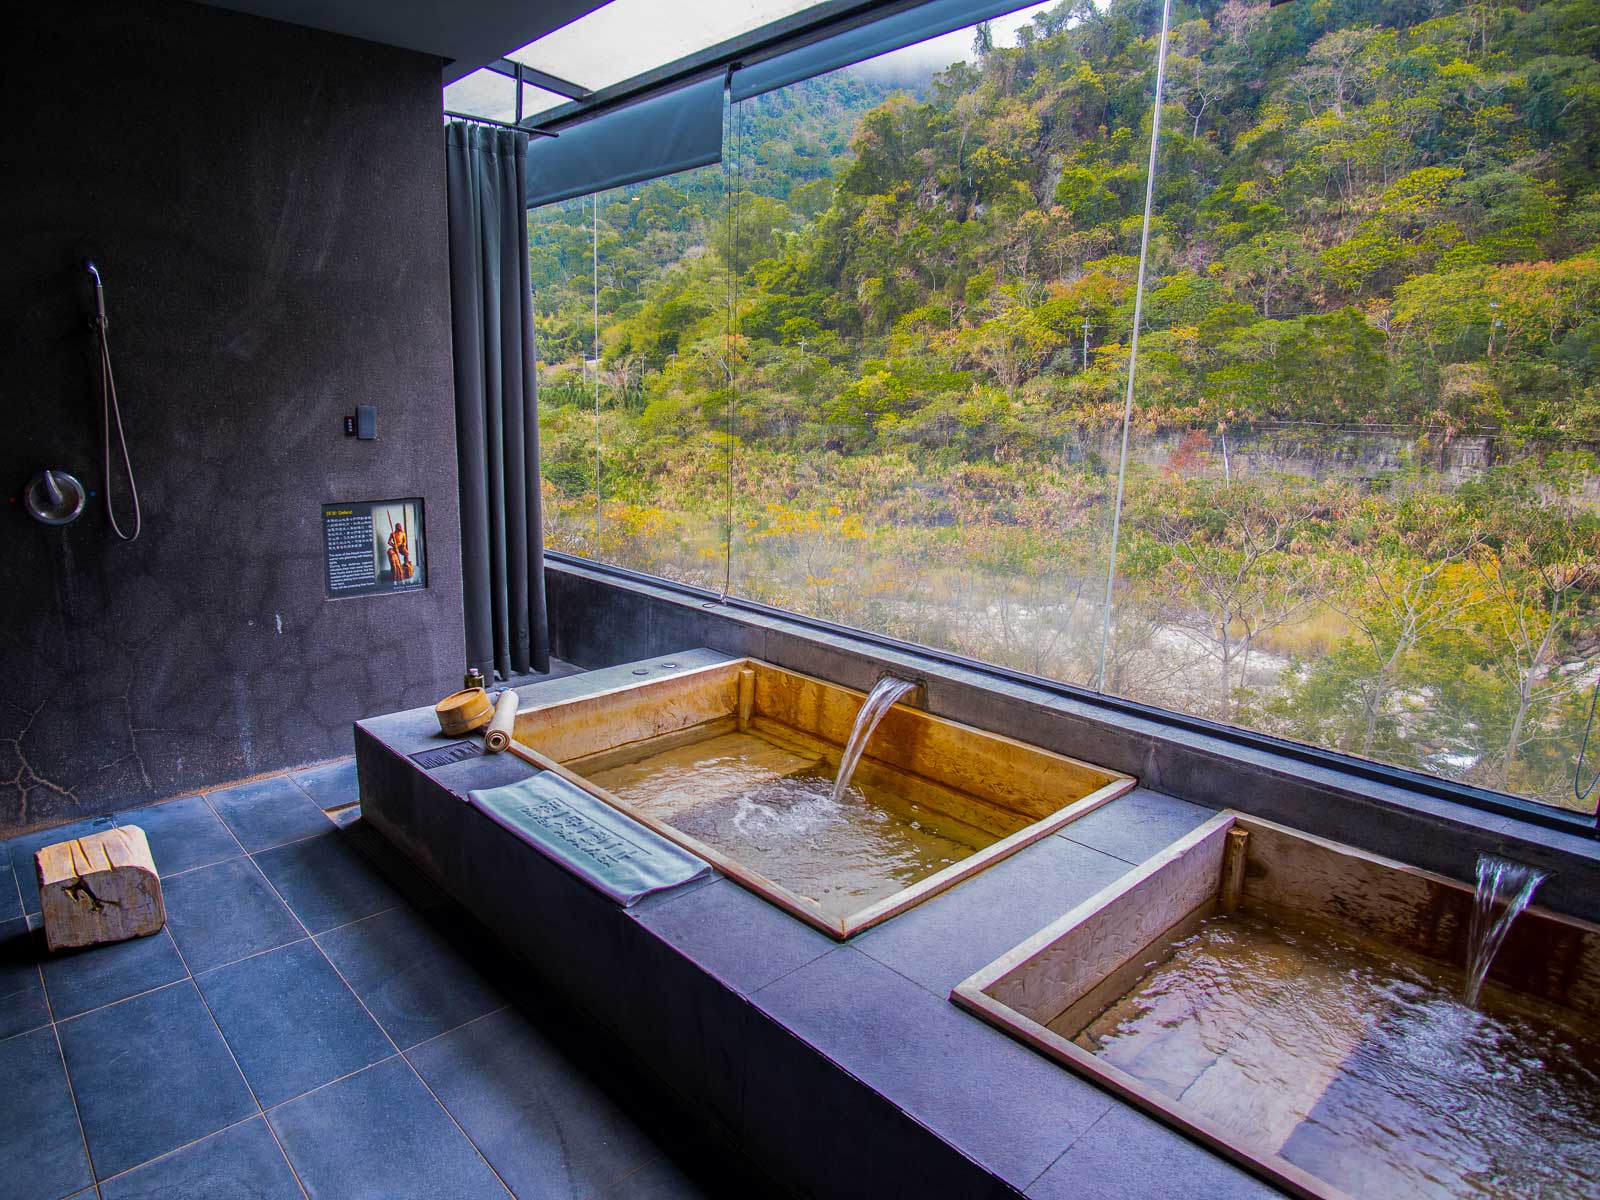 Private indoor bathing pools sit next to floor-to-ceiling windows that overlook the nature outside.